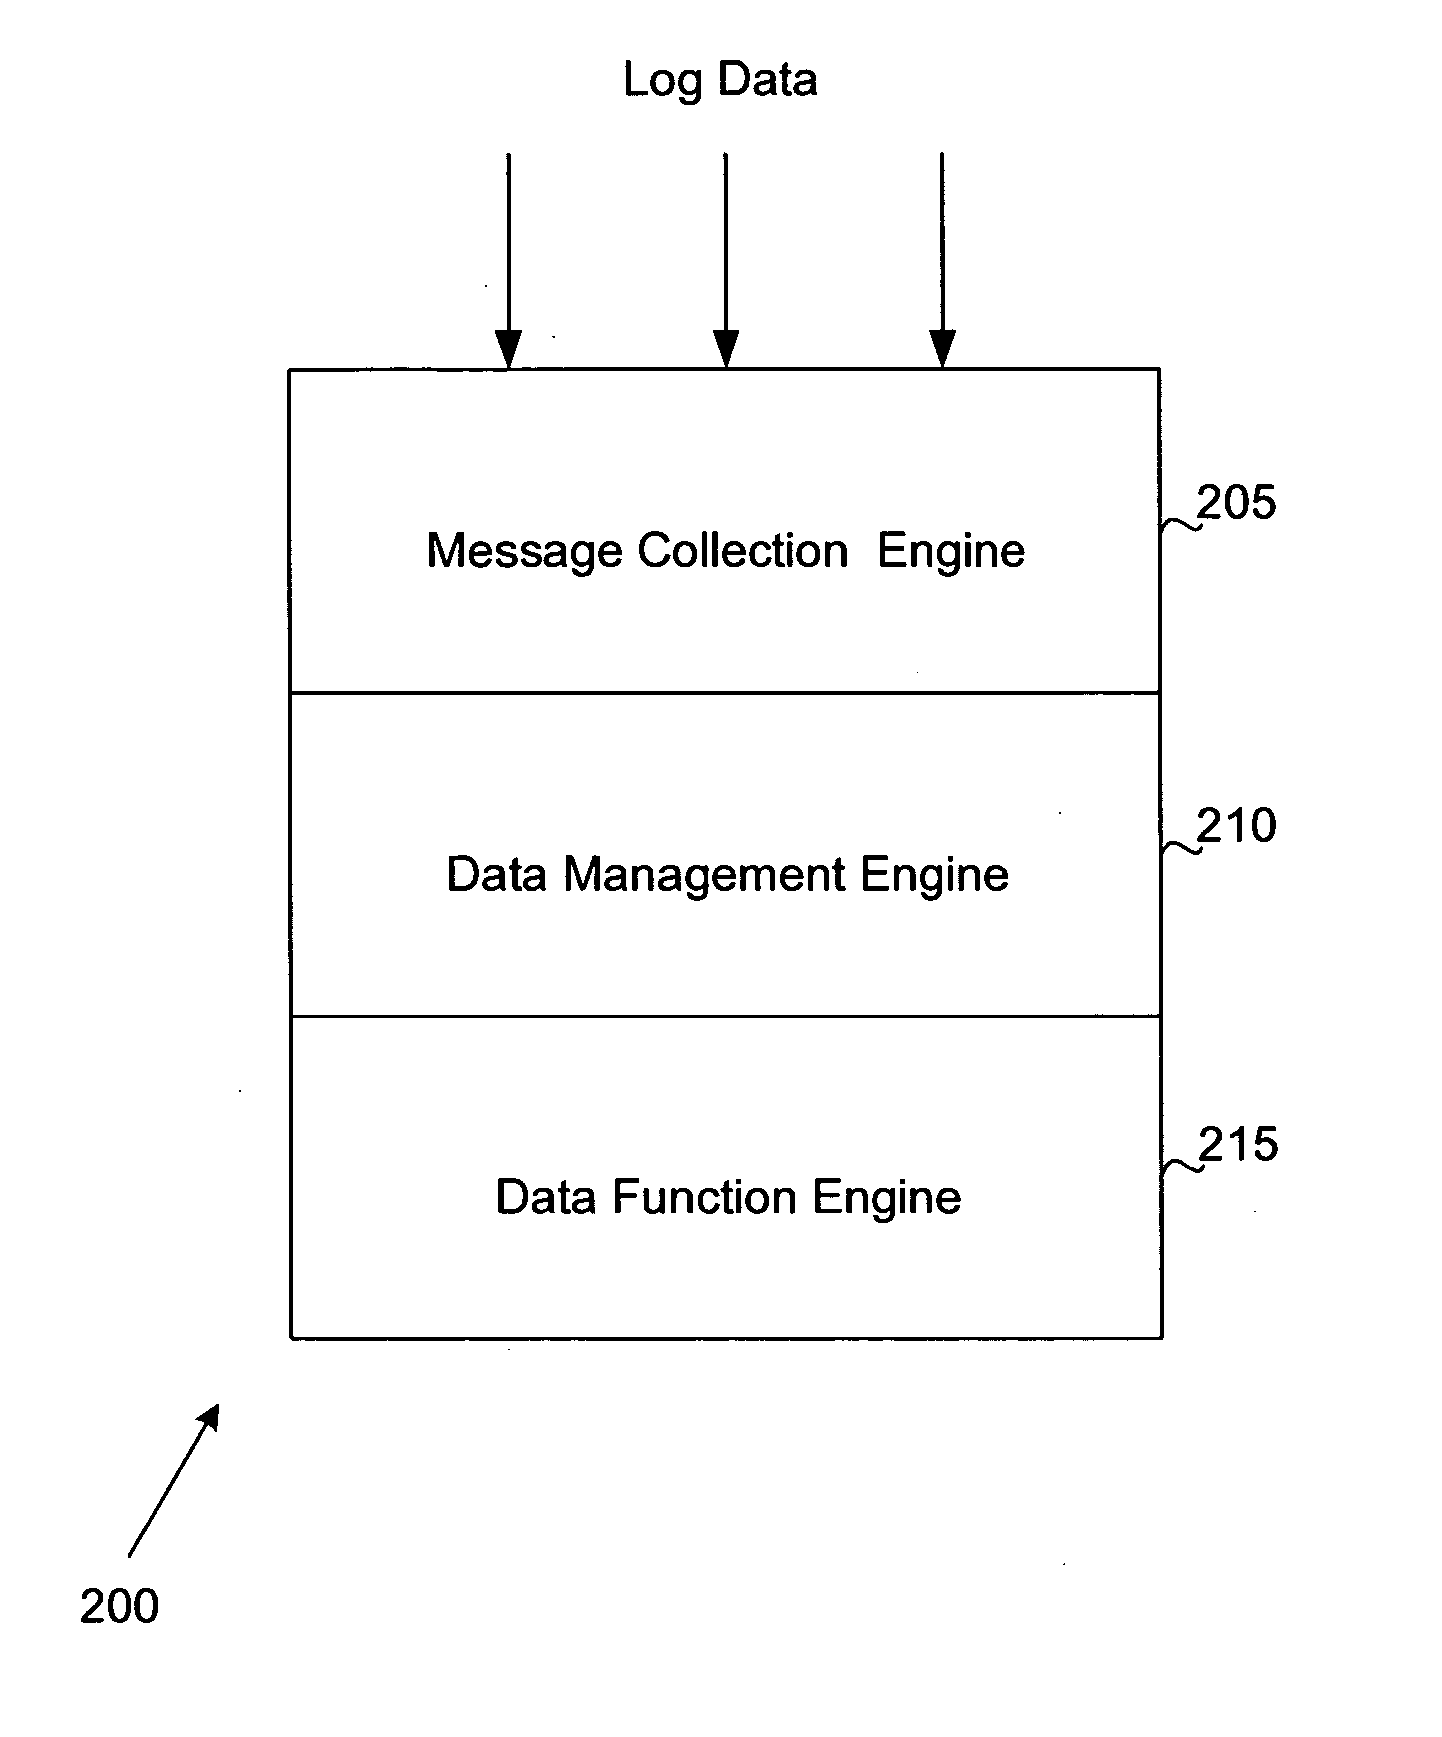 System and method for parsing, summarizing and reporting log data